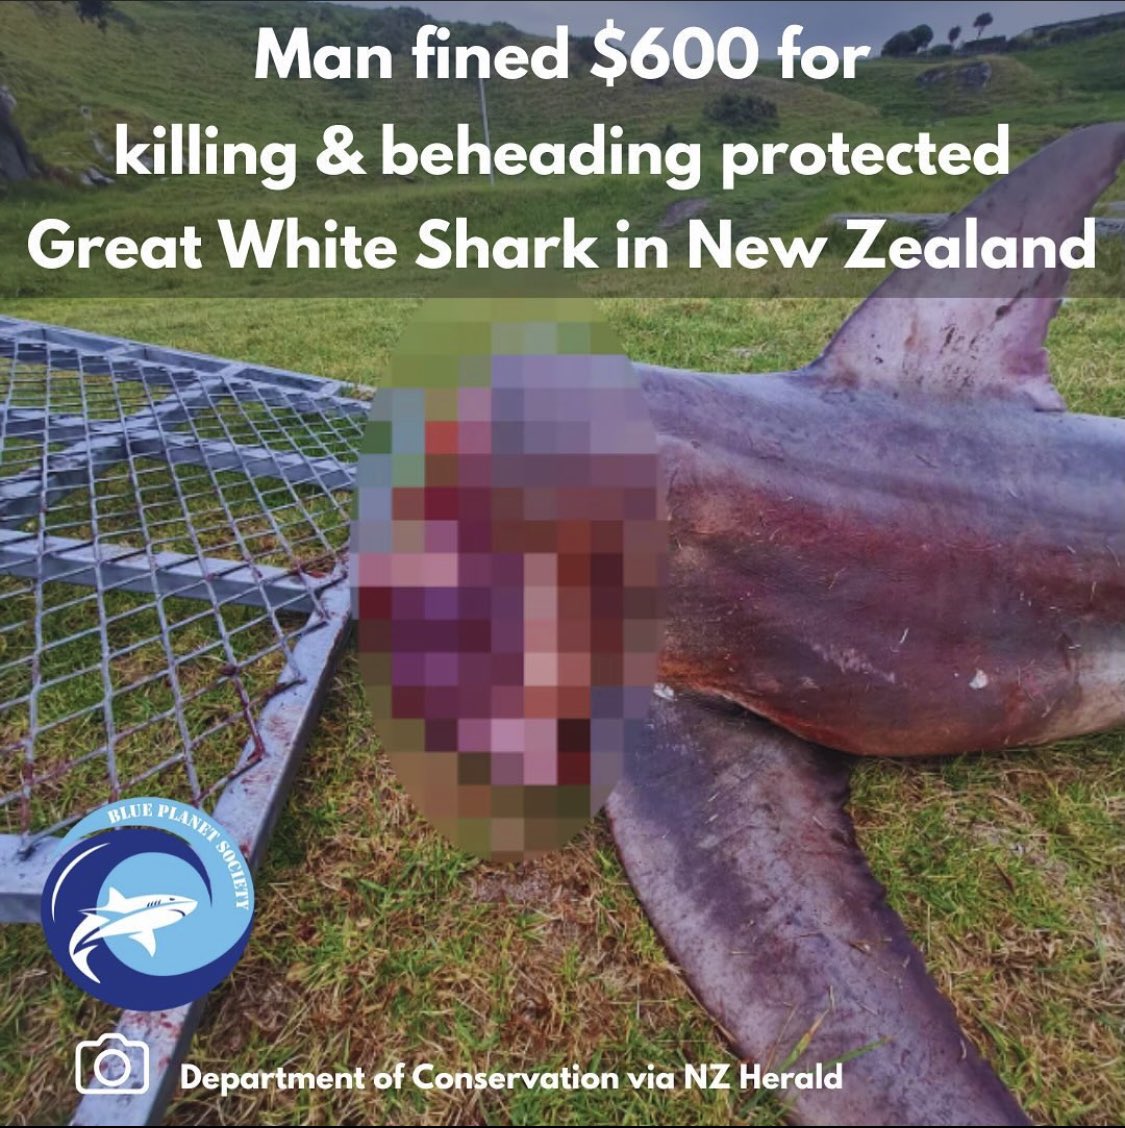 A great white shark jaw can sell for $50K USD. @docgovtnz slapping this poacher on the wrist with a $600 fine just encourages him to kill more. We in the west point the finger at the Asian fin trade for wiping out sharks while we ignore the multimillion dollar jaw trophy trade.